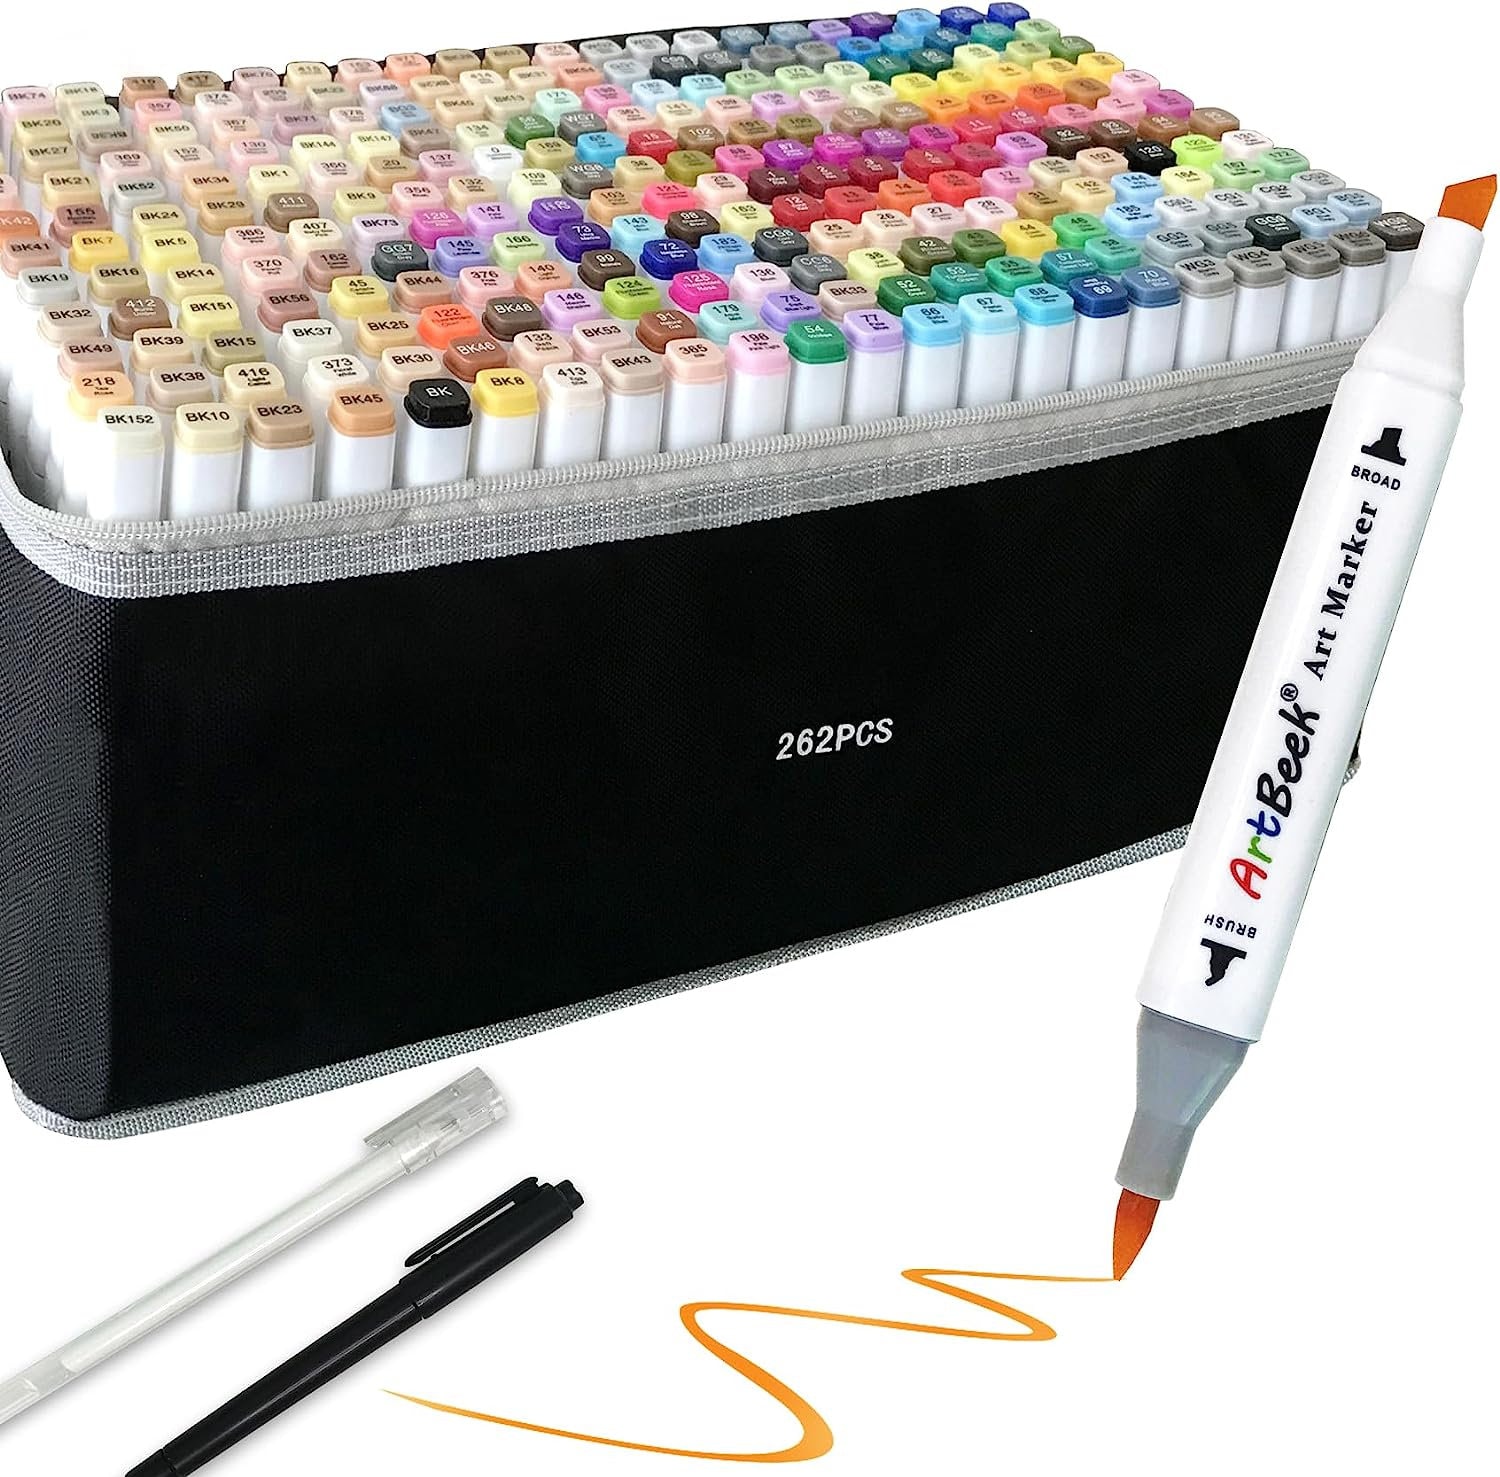 ArtBeek Alcohol Brush Markers 120 Colors,Dual Tip Permanent Artist Sketch Markers for Kids and Adult